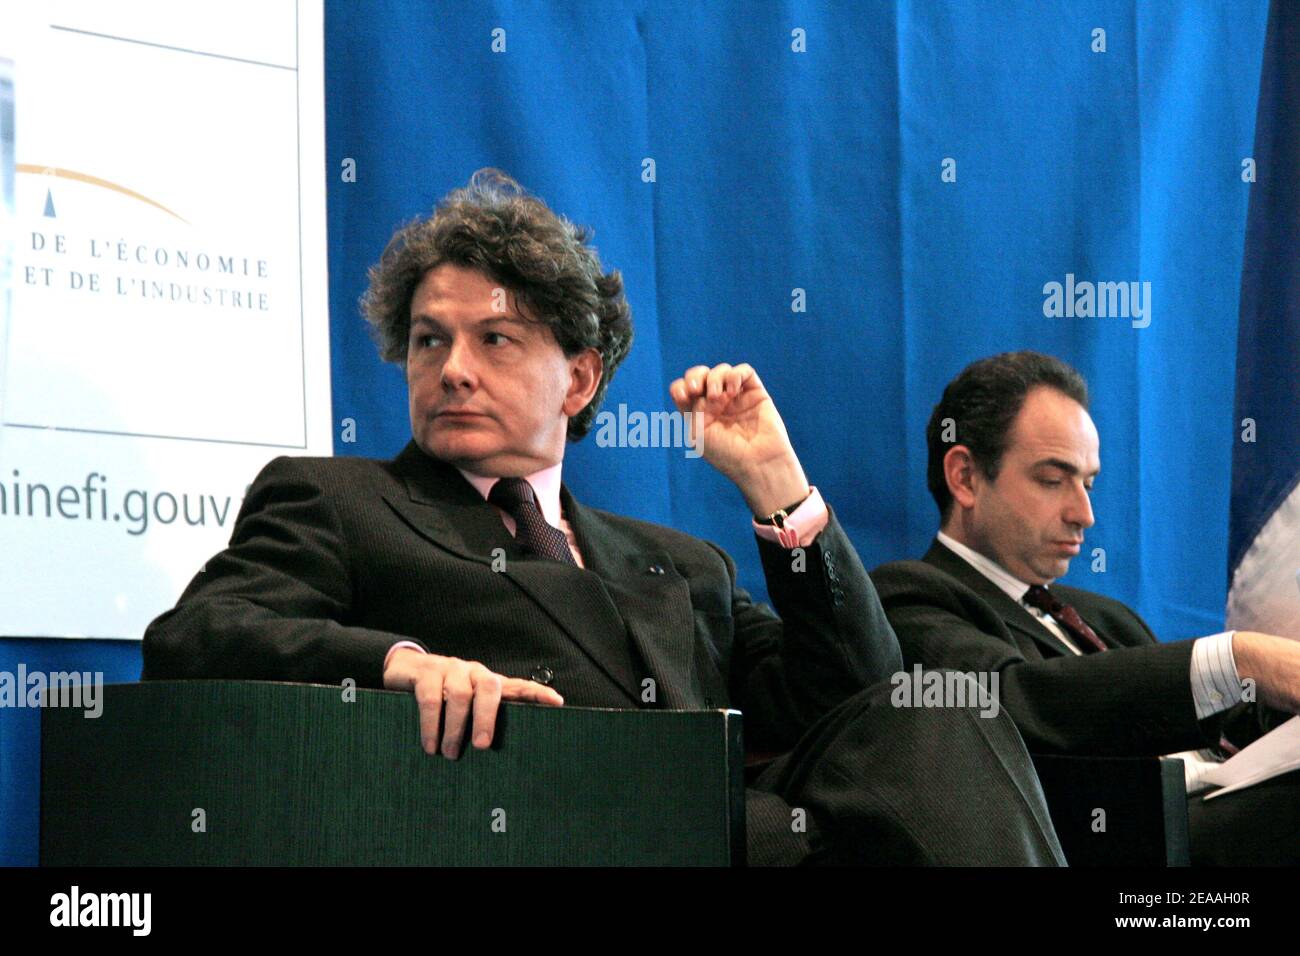 French finances minister Thierry Breton listening BNP Paribas Michel Pebereau, delivering his speech, during a press conference on France public debt at finances minister in Paris, on december 14, 2005. Photo by Denis Guignebourg/ABACAPRESS.COM Stock Photo